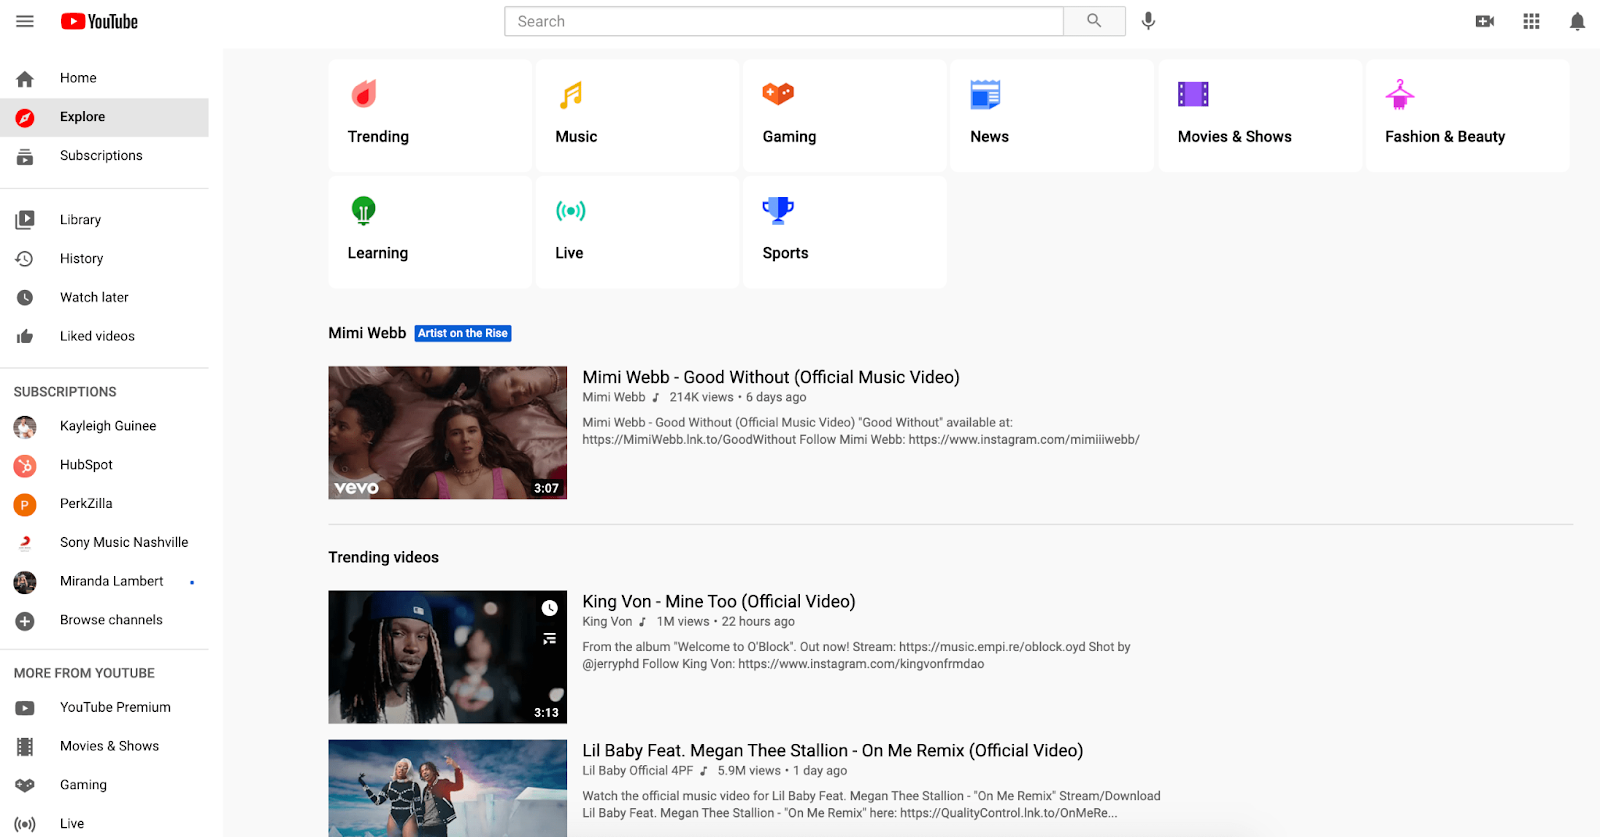 YouTube's Trend/Explore section, which is one browse feature